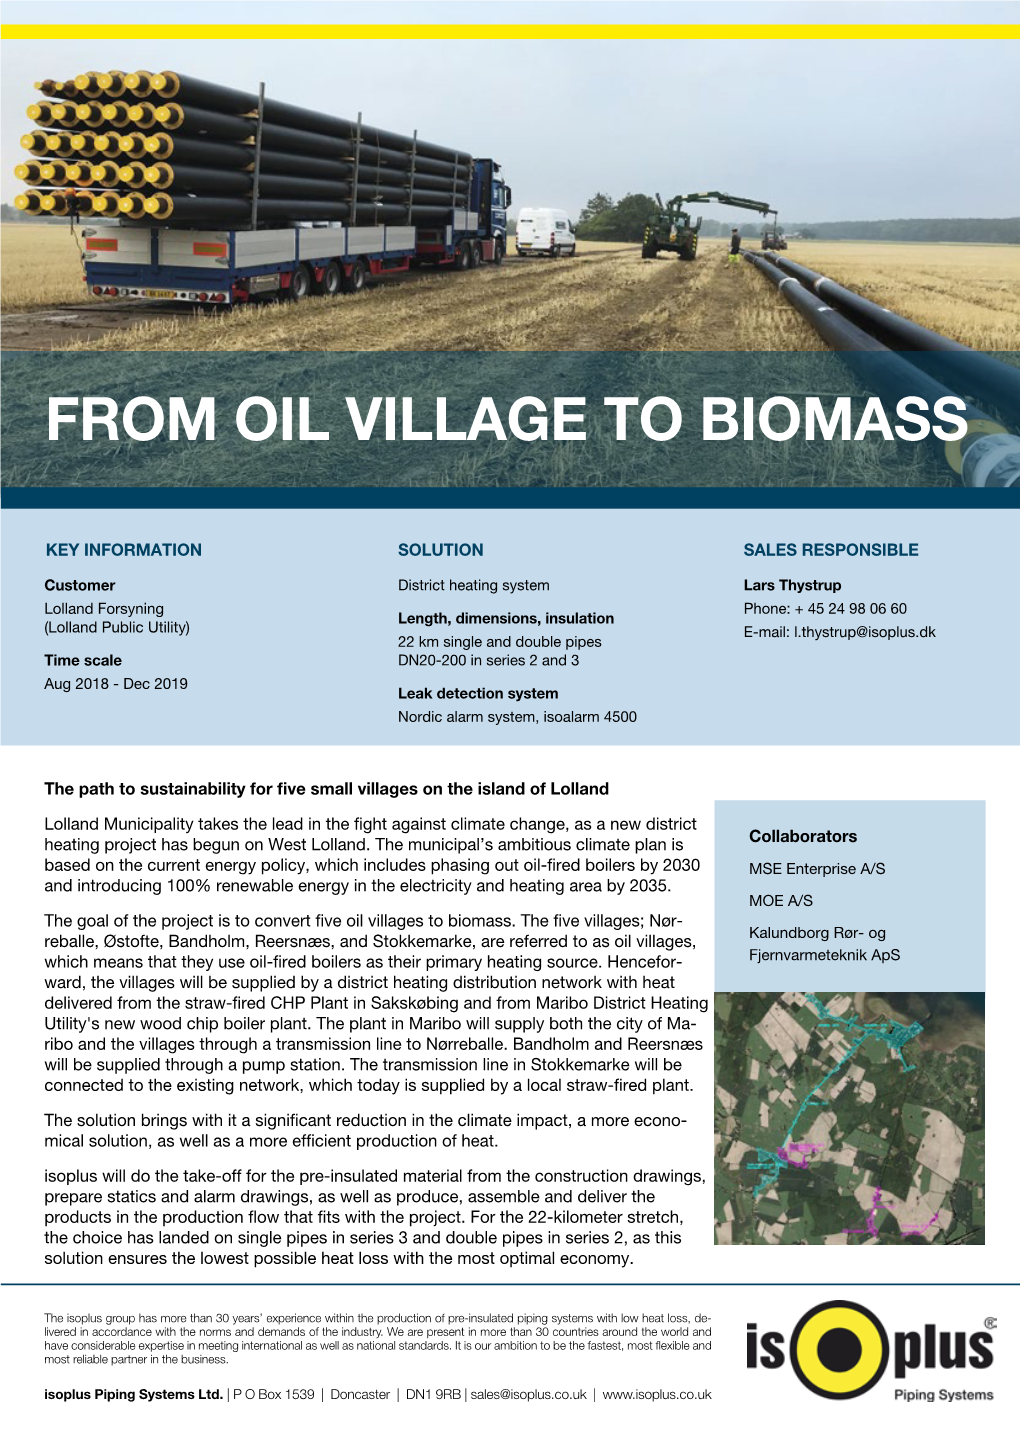 From Oil Village to Biomass